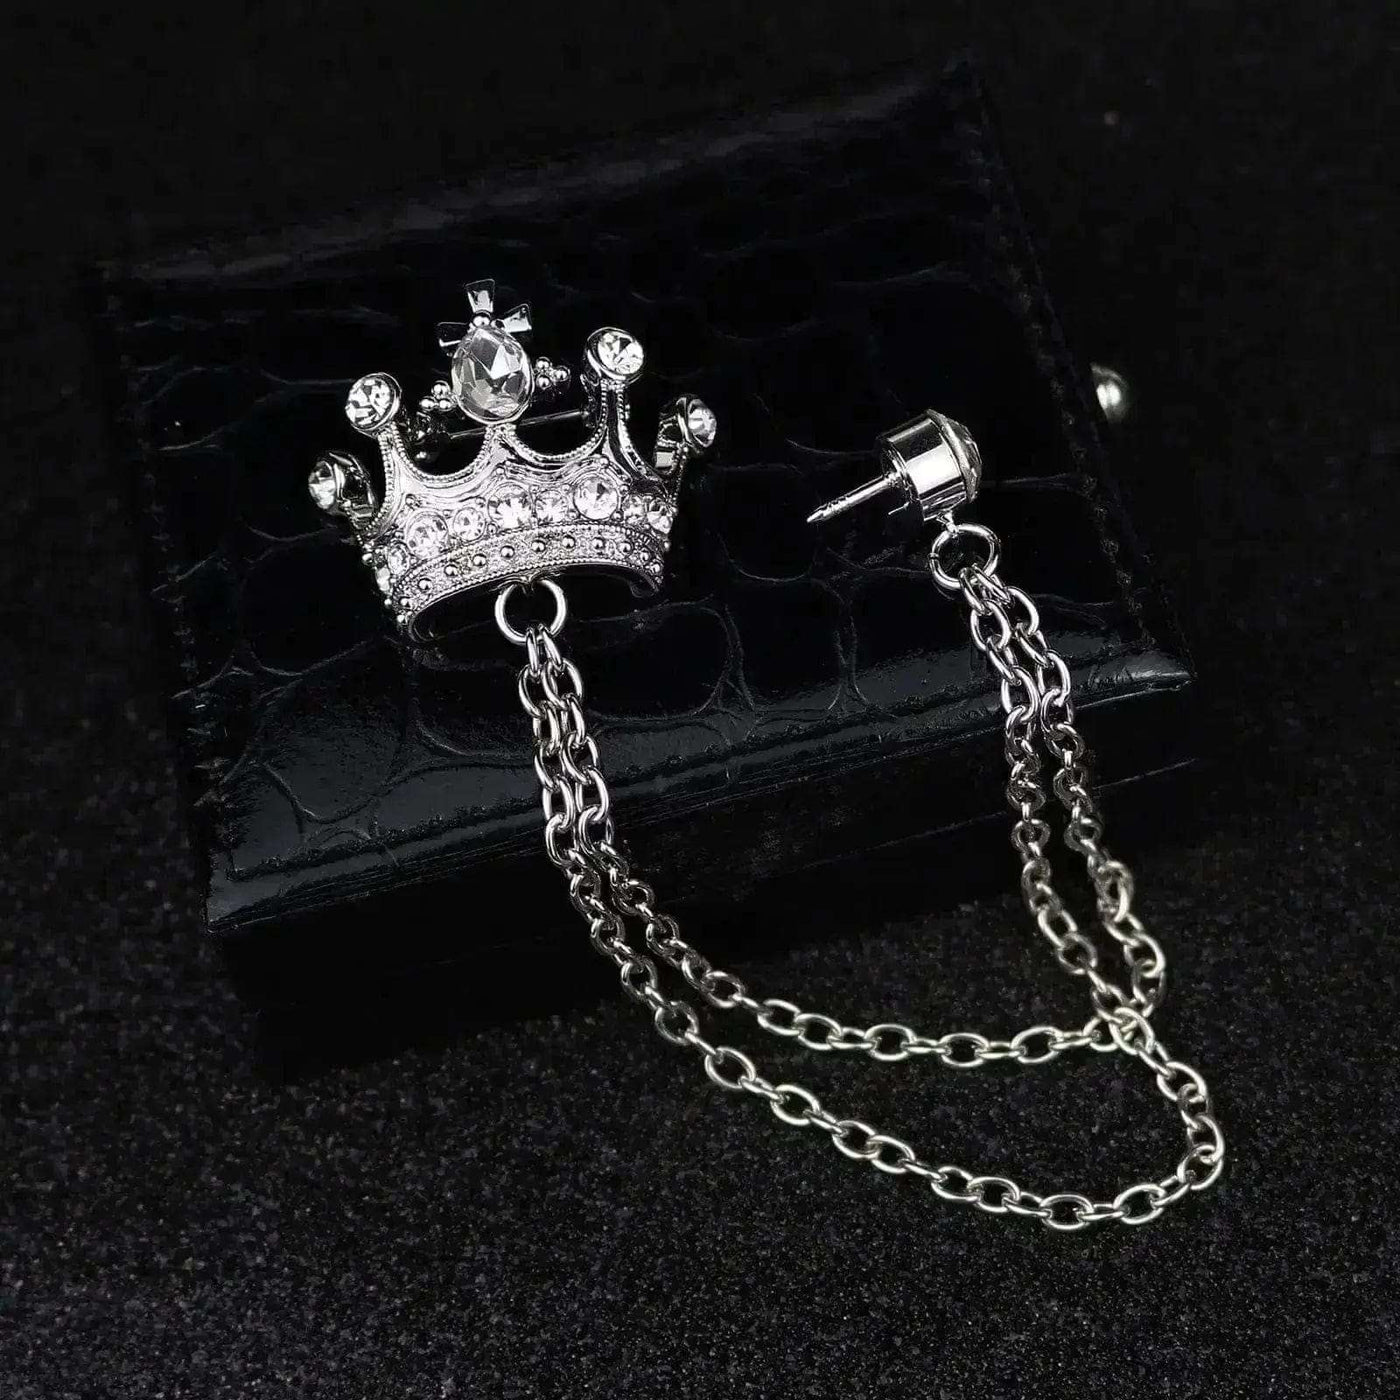 BROOCHITON Brooches Silver Crown Suit Chain Brooch